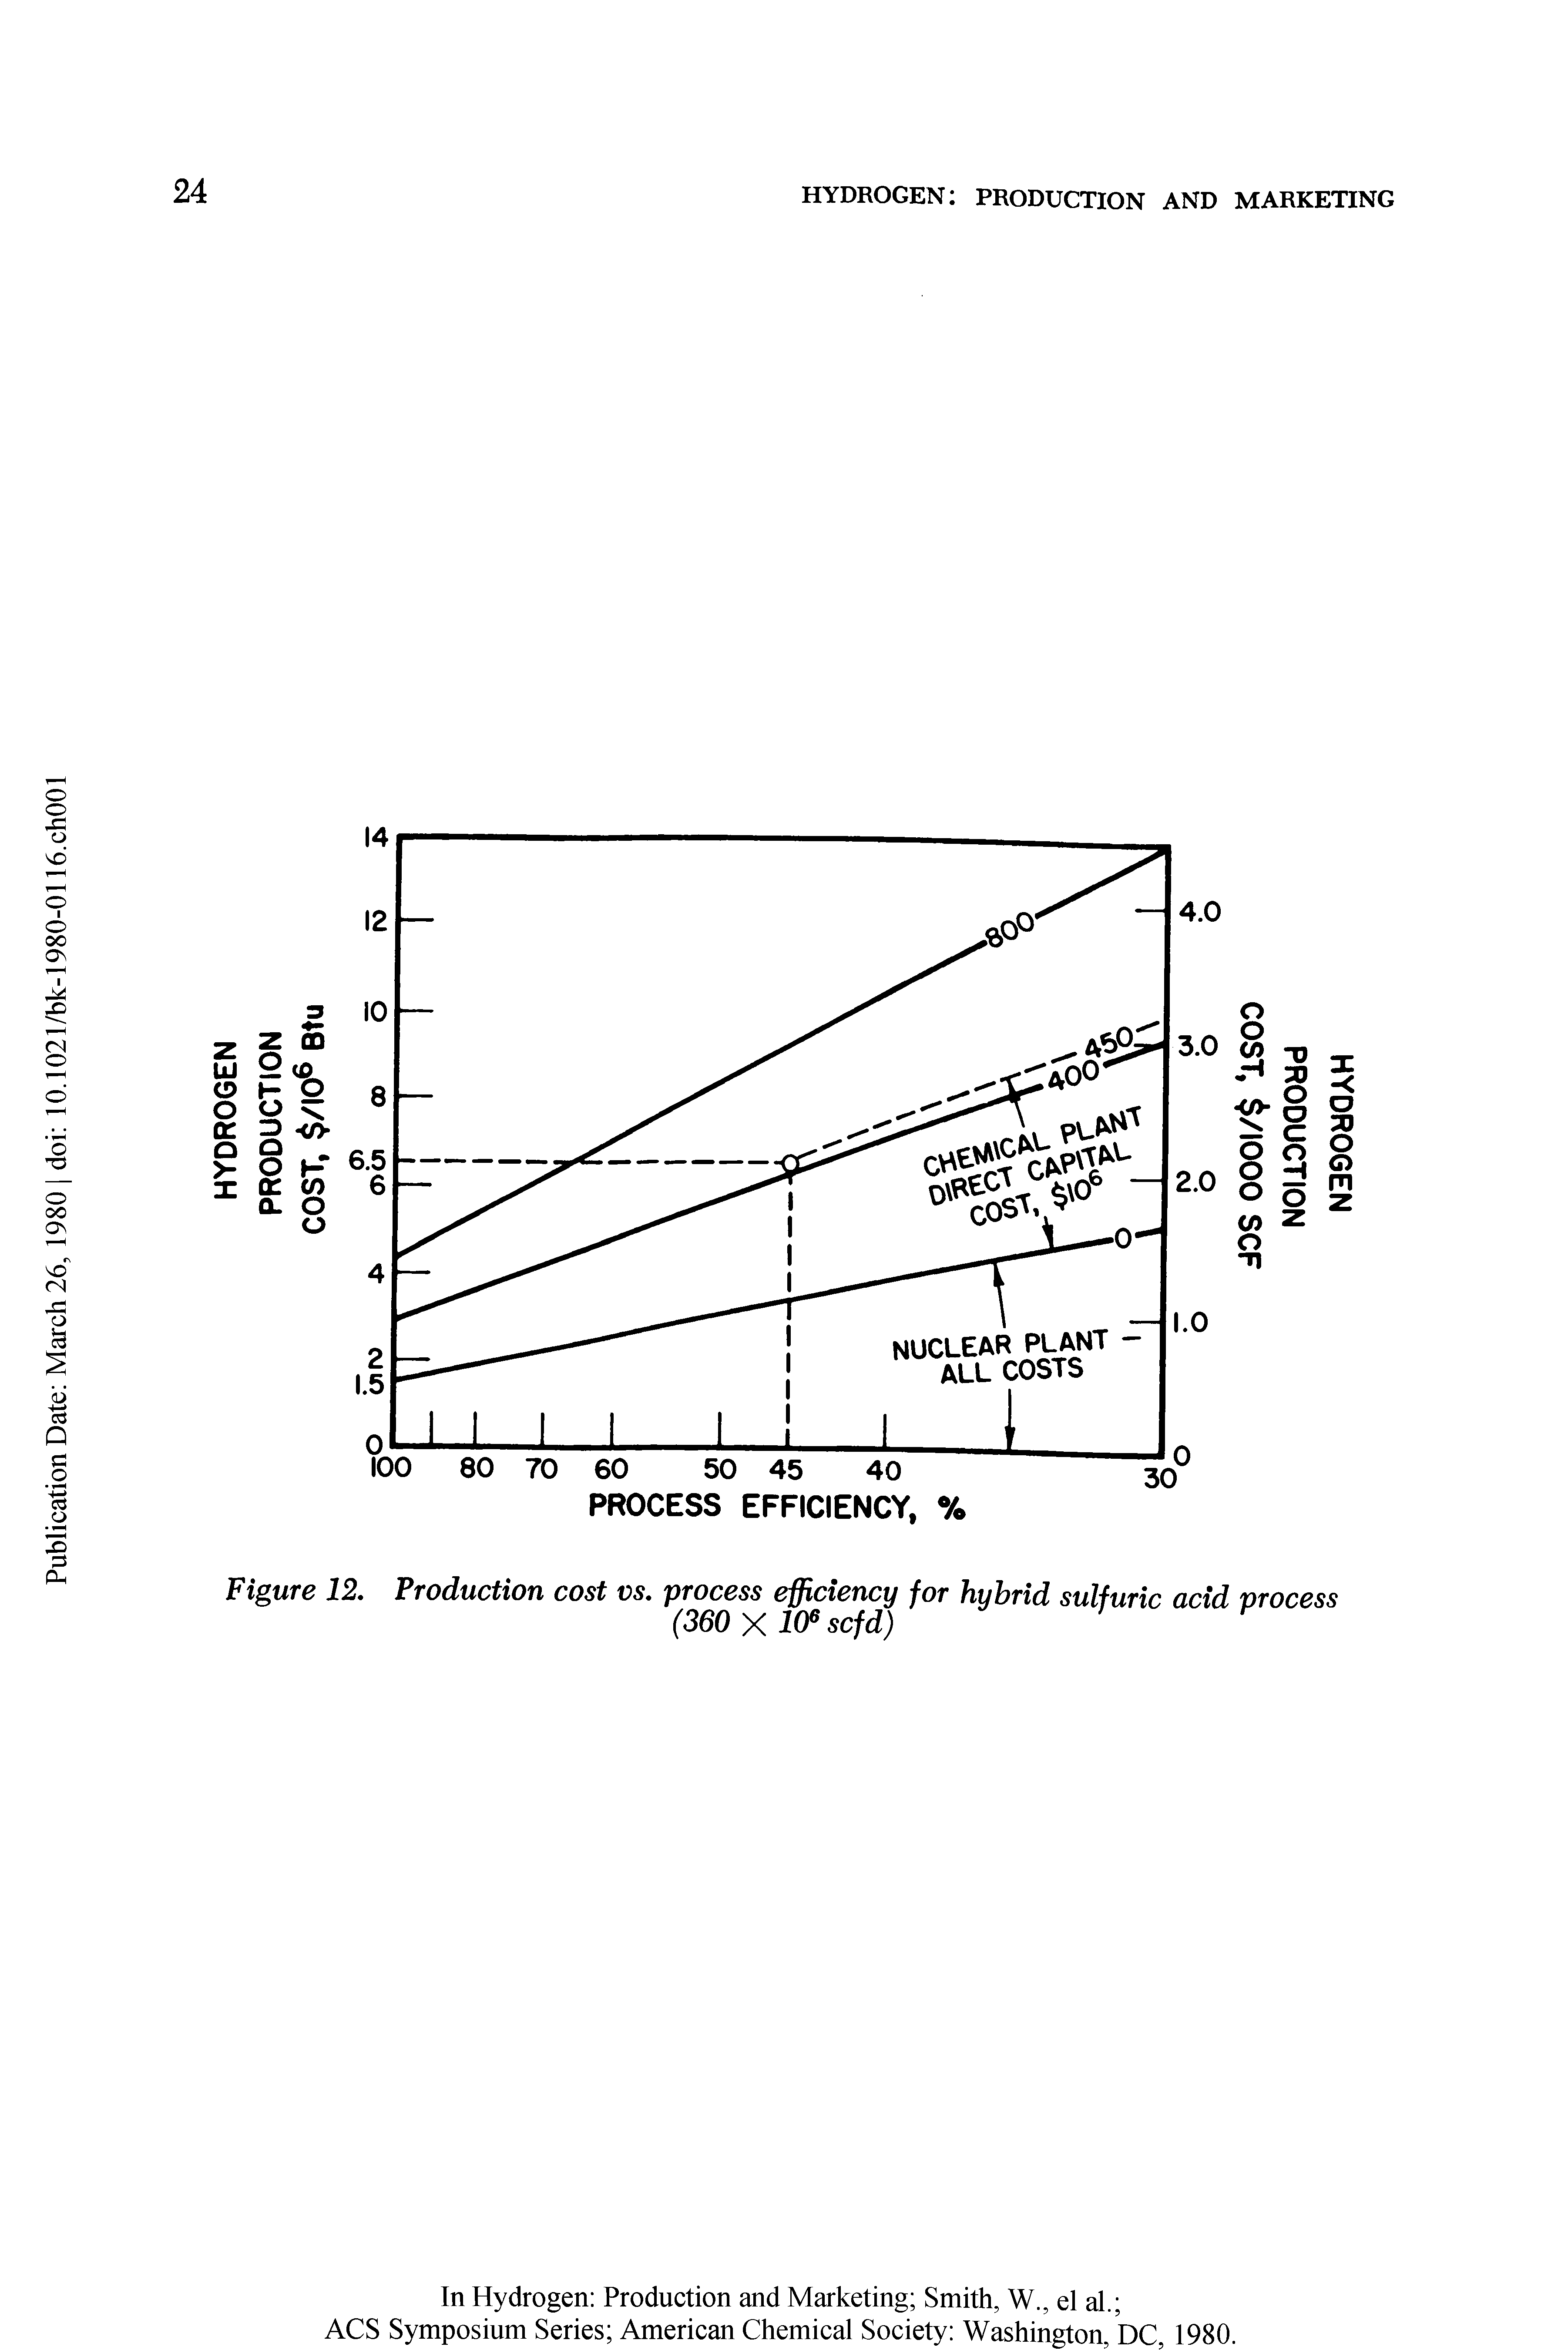 Figure 12. Production cost vs. process efficiency for hybrid sulfuric acid process...